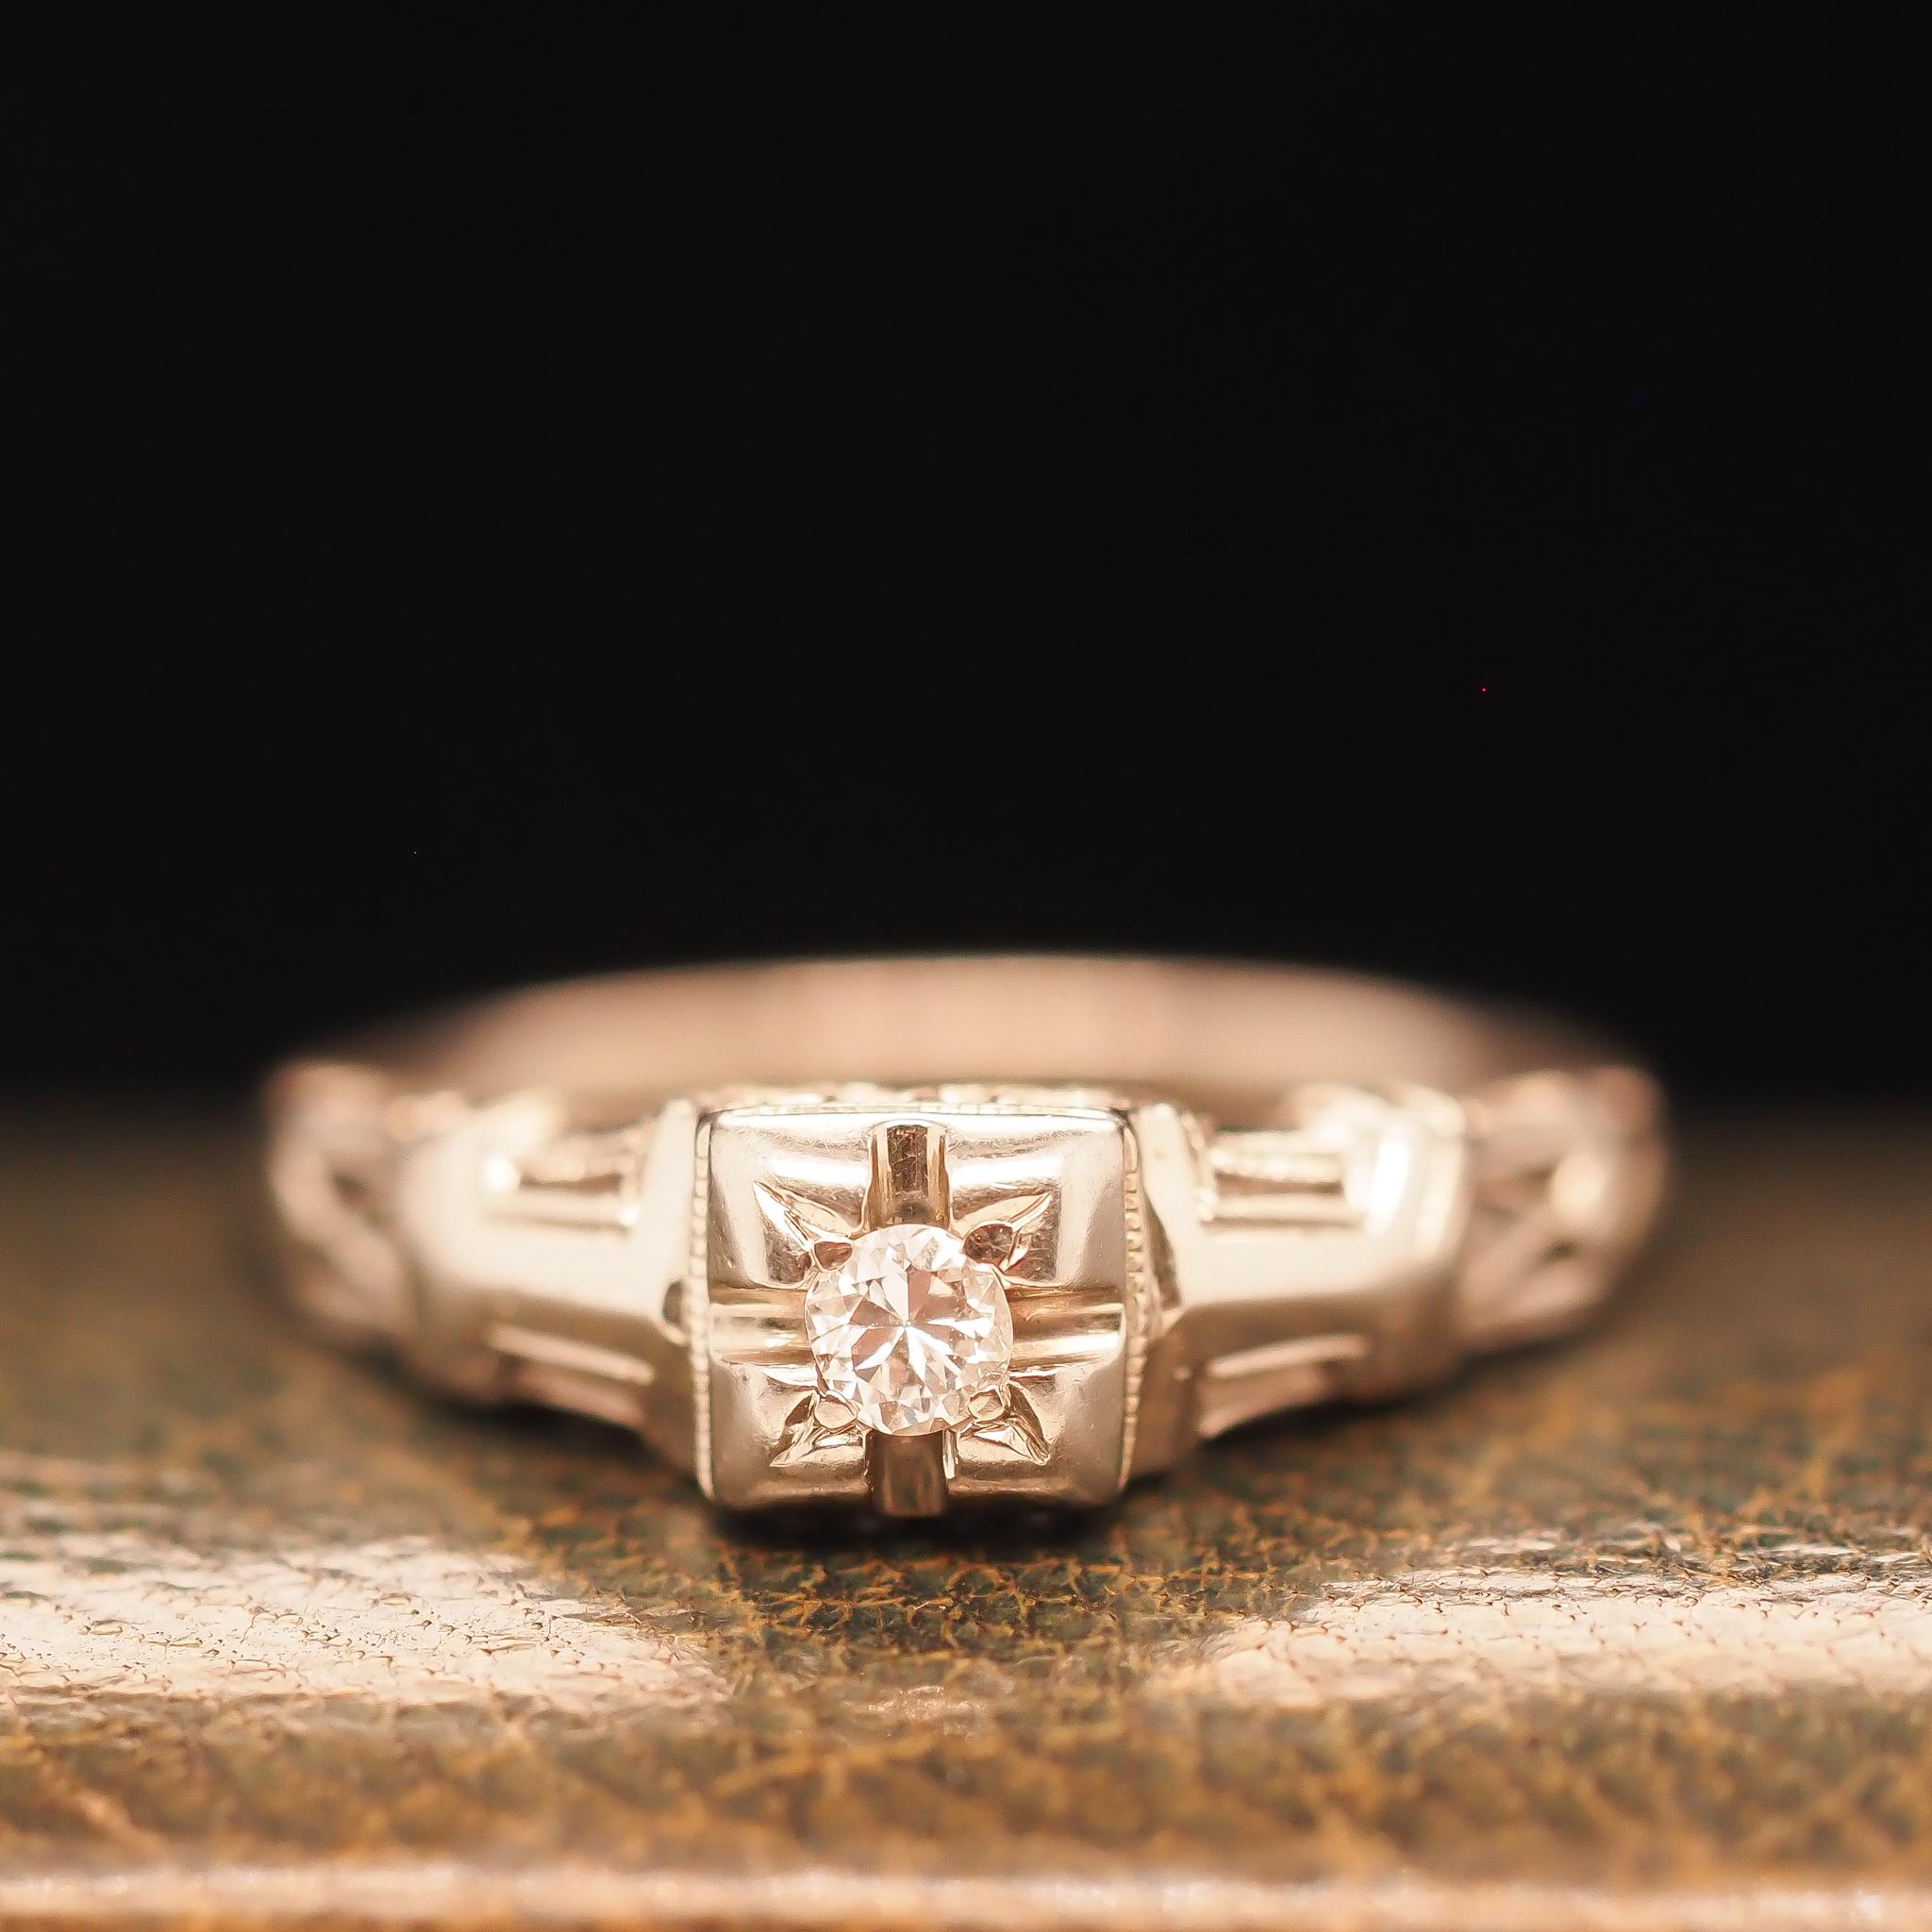 Year: 1930s
Item Details:
Ring Size: 6.5 (Sizable)
Metal Type: 18K White Gold[Hallmarked, and Tested]
Weight: 2.5 grams
Diamond Details: .08ct, Old European Brilliant, G color, VS Clarity
Side Stone Details:
Band Width: 1.7mm
Condition: